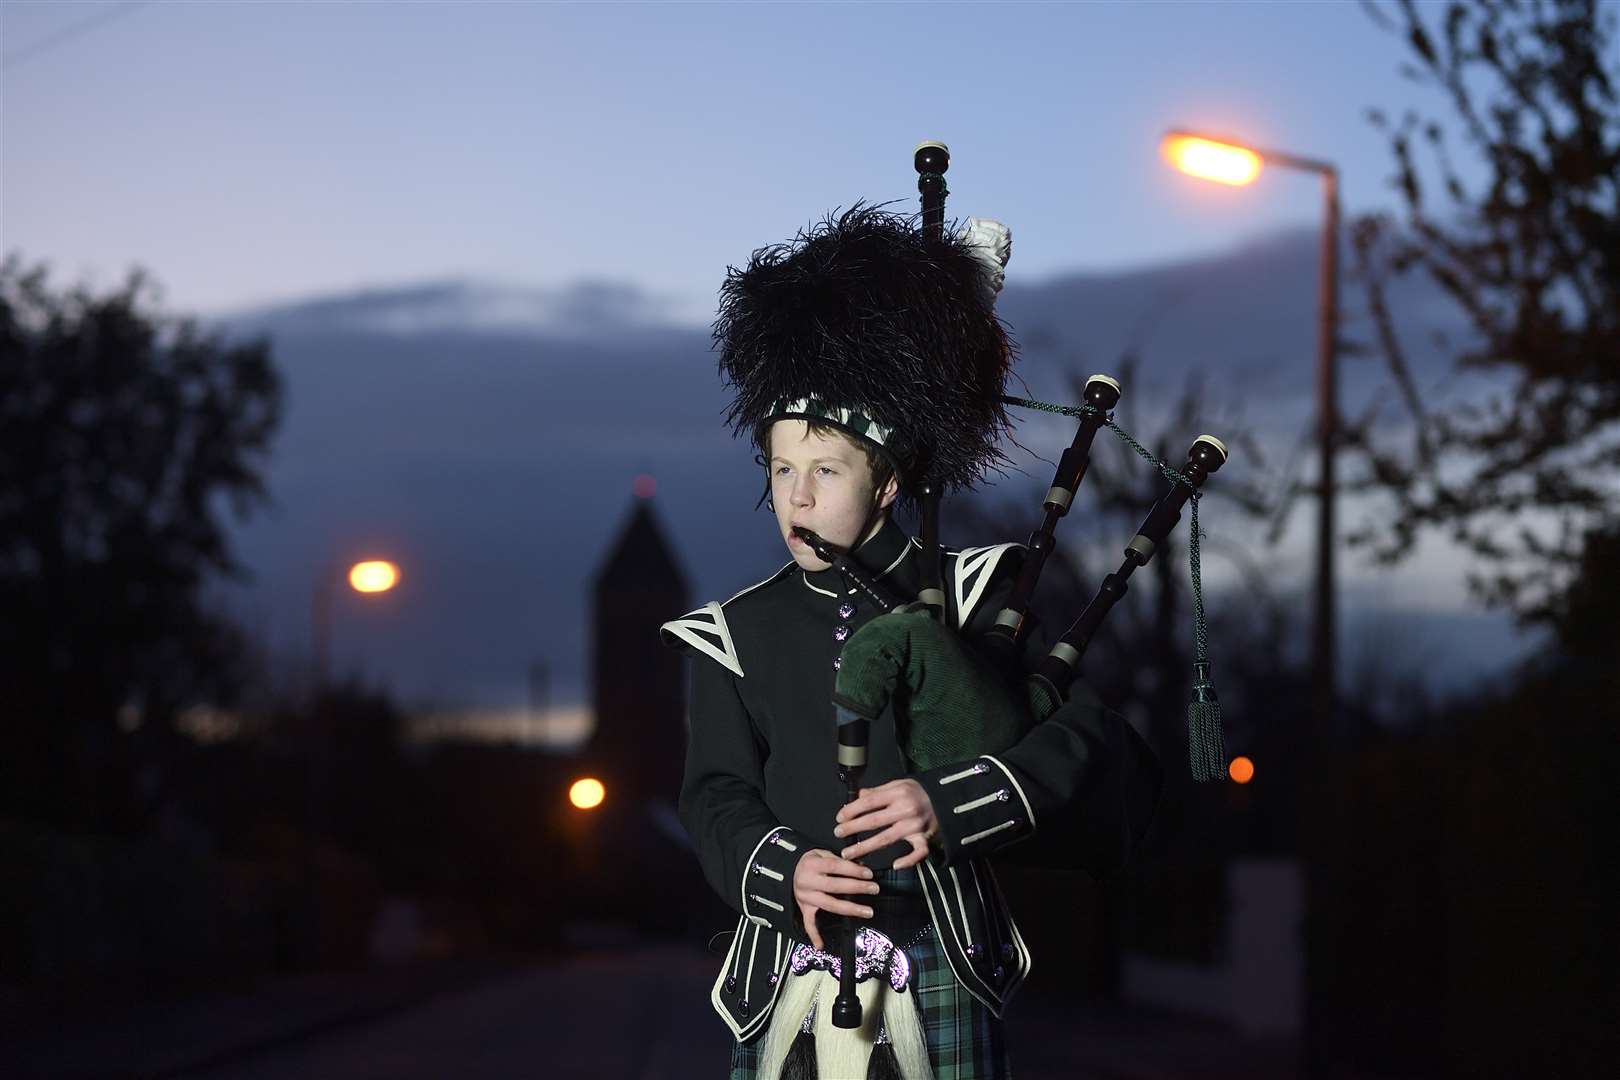 George Orchin, 12, plays for the healthcare workers on his street (Michael Cooper/PA)